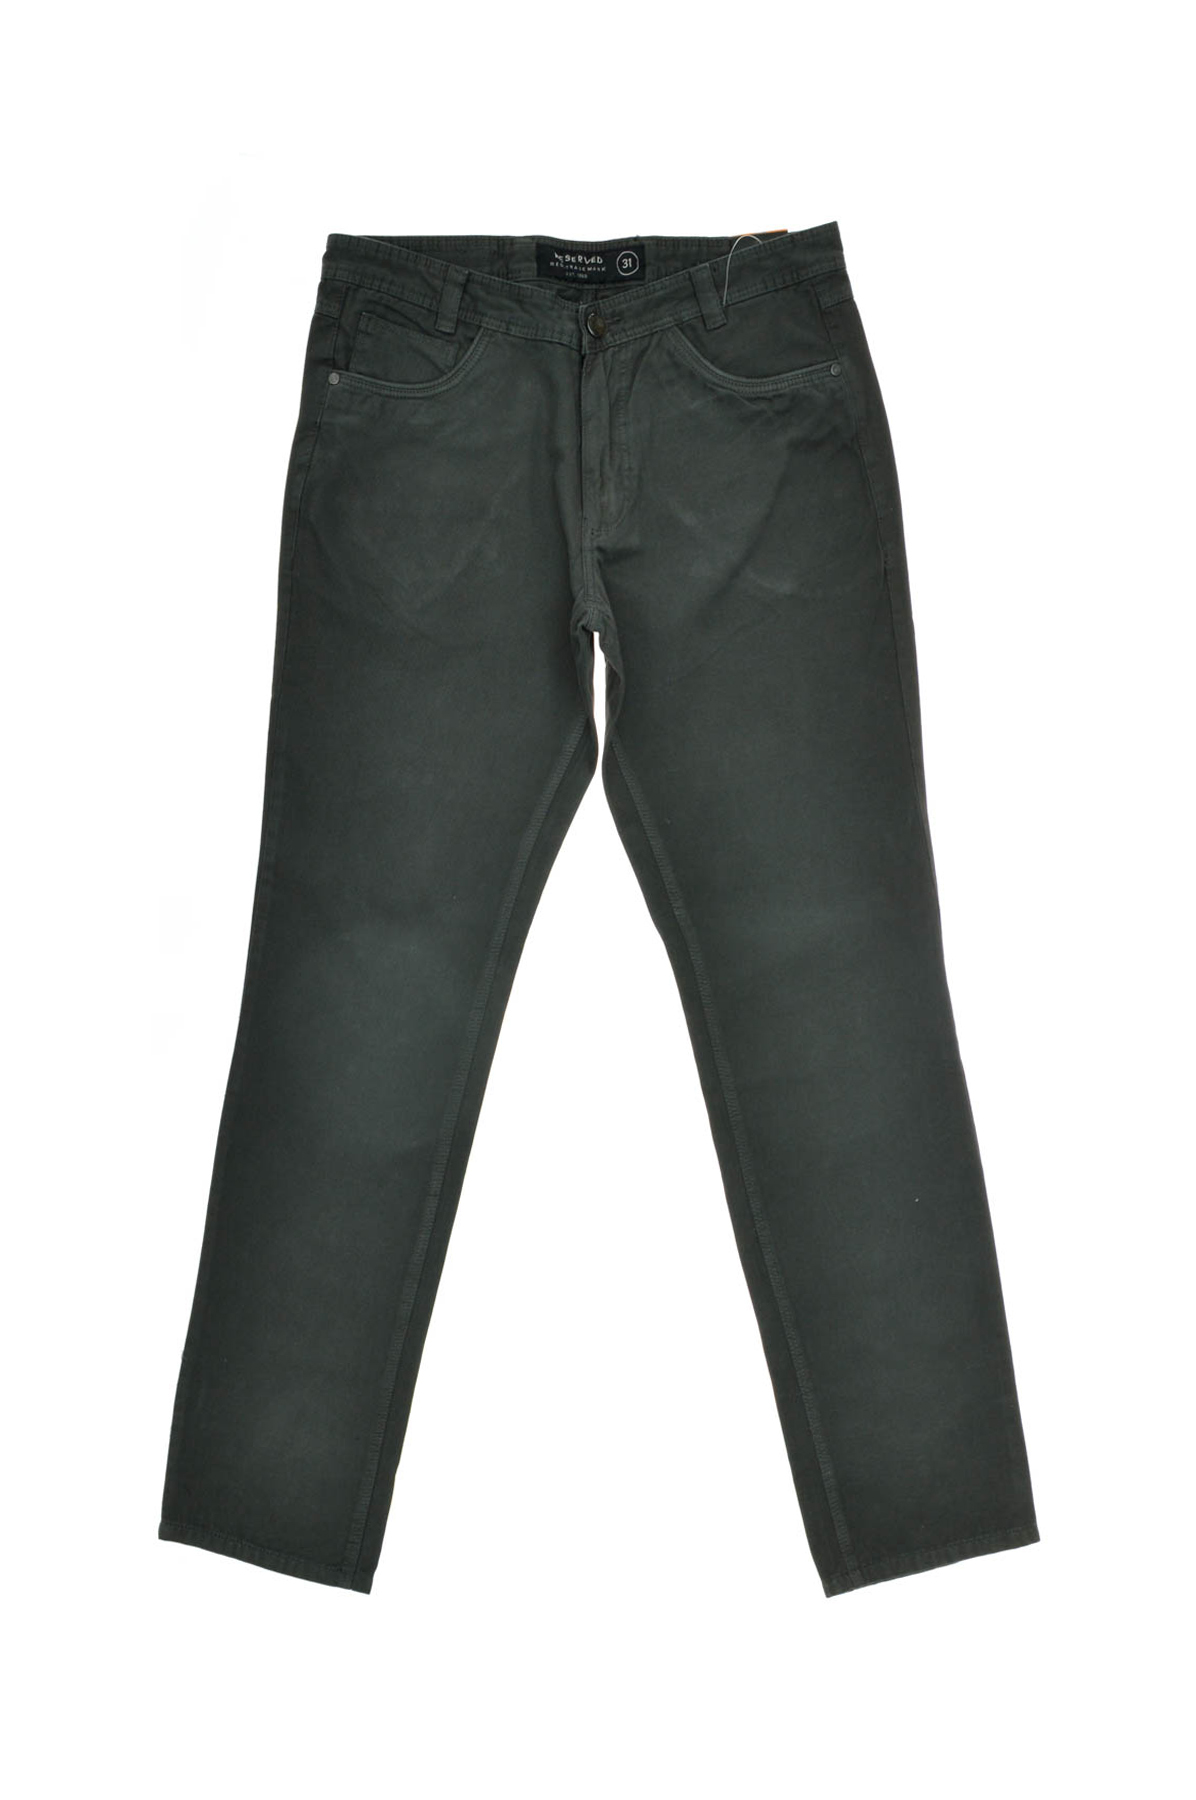 Men's trousers - RESERVED - 0